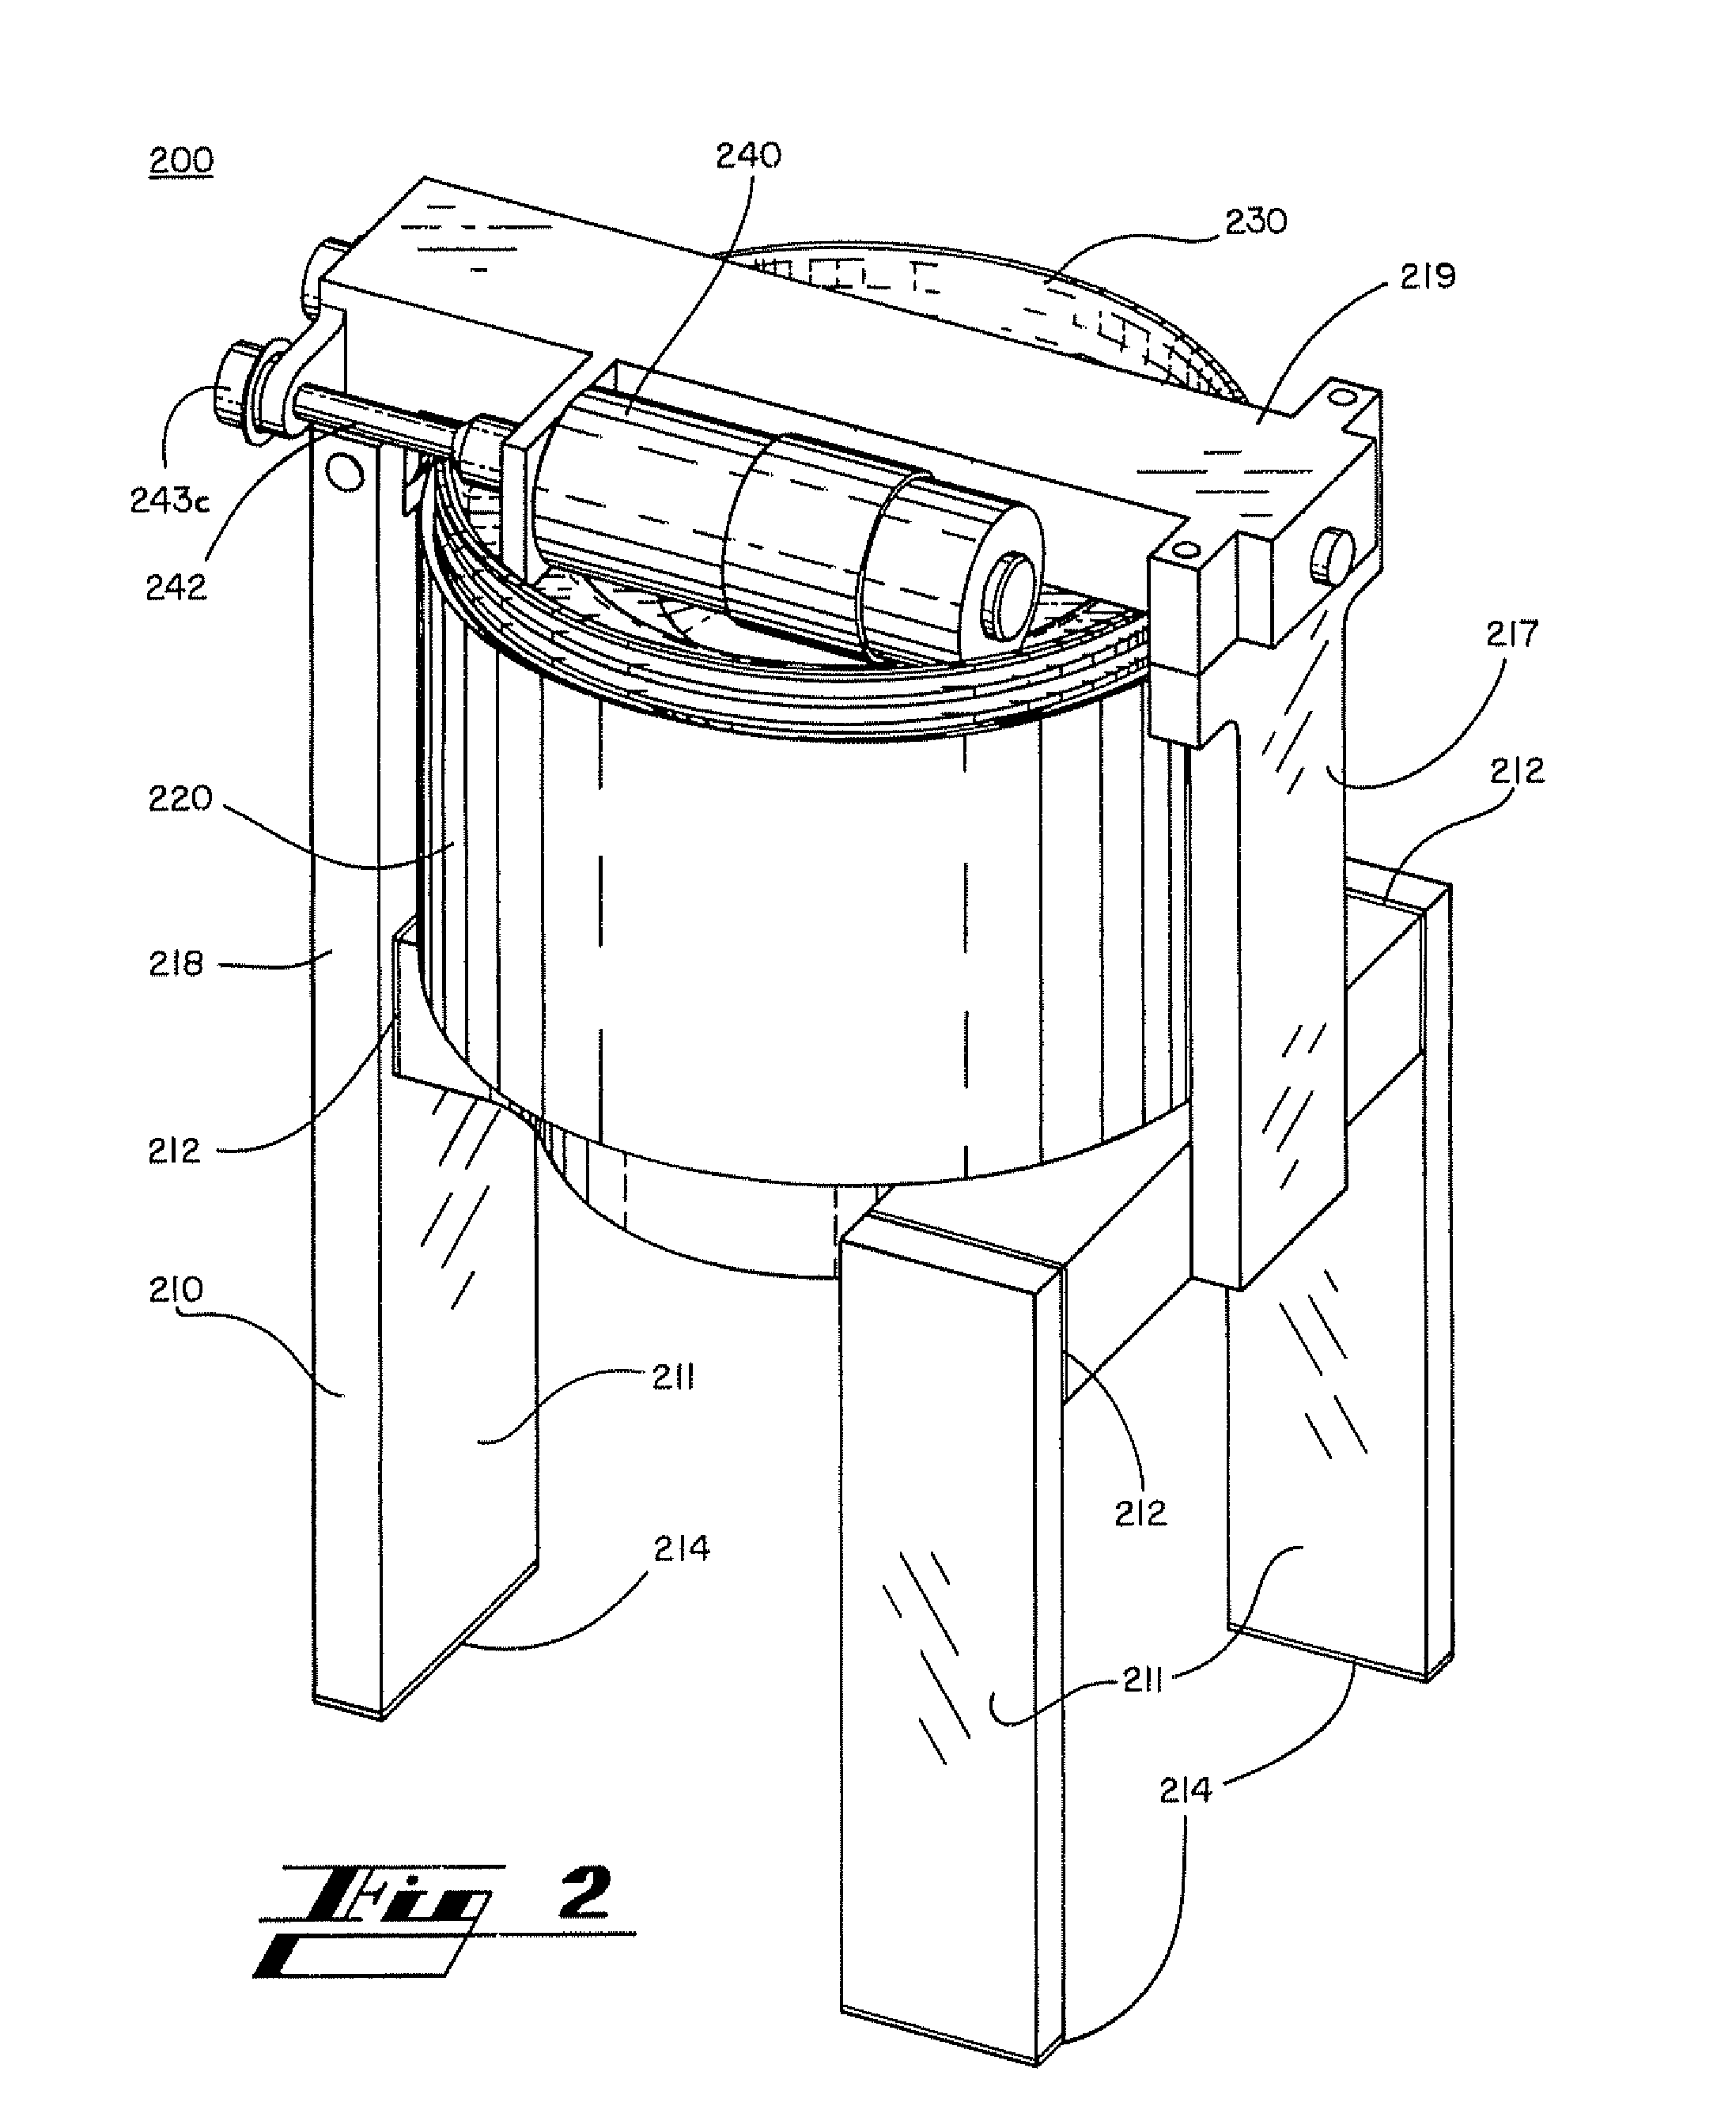 System and method for brewing beverages